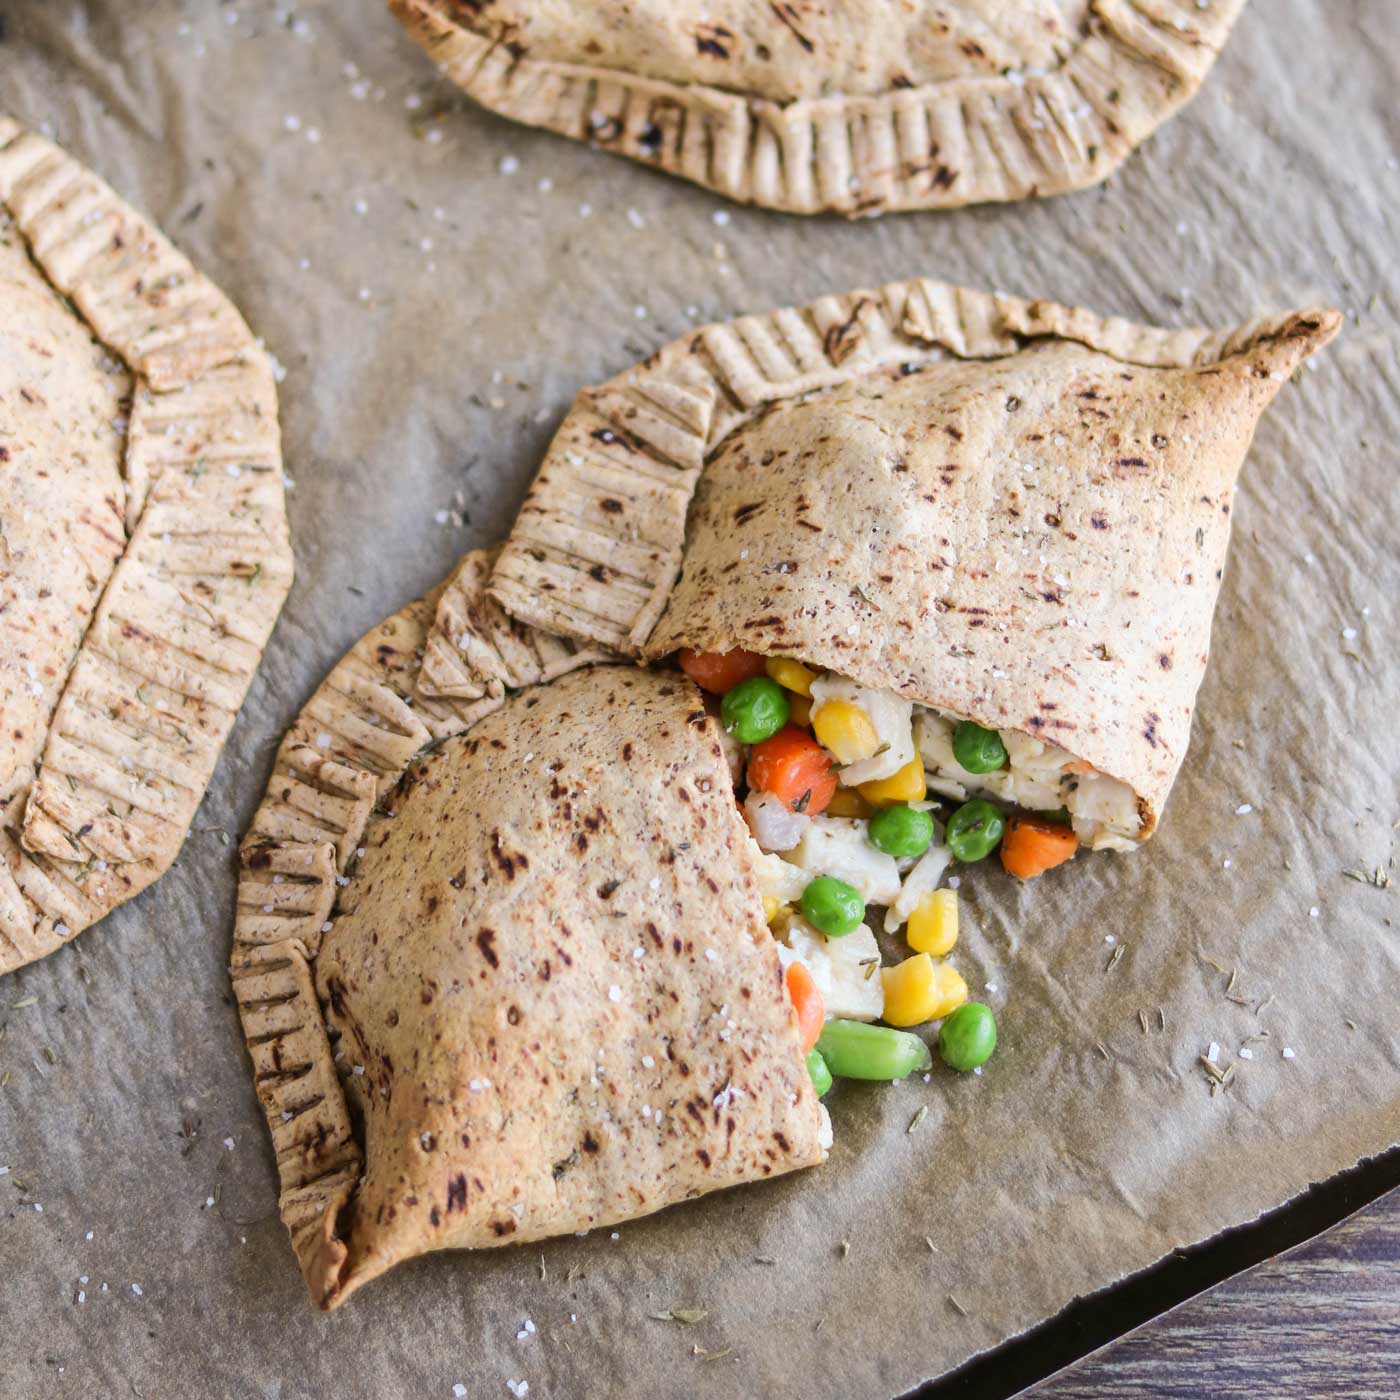 These Chicken Pot Pie Pockets have all the comforting, homestyle goodness of traditional chicken pot pies, but are so healthy and totally portable! You’ll love these yummy hand pies – and your kids will, too!